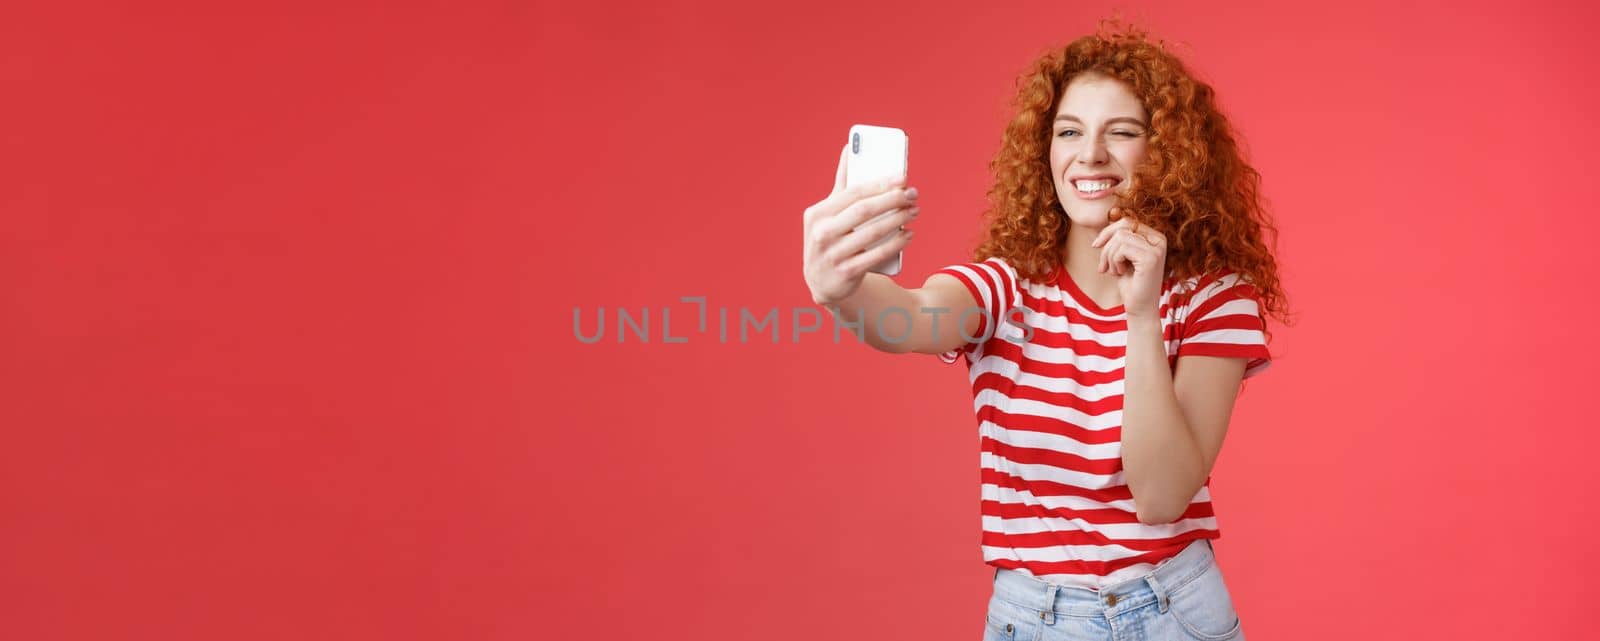 Lifestyle. Sassy good-looking stylish charismatic redhead female curly hairstyle winking cheeky expression making flirty kinky faces hold smartphone taking selfie record video message play funny facial filters.